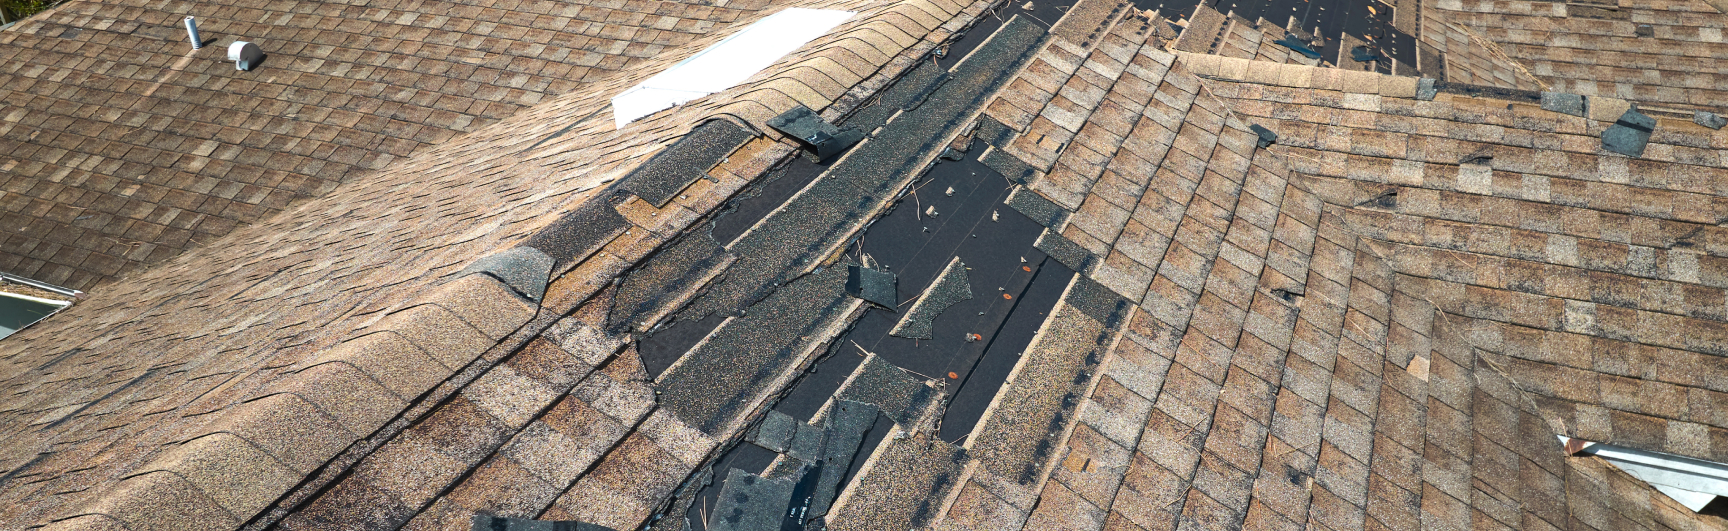 Image of a roof with a very bad leak.